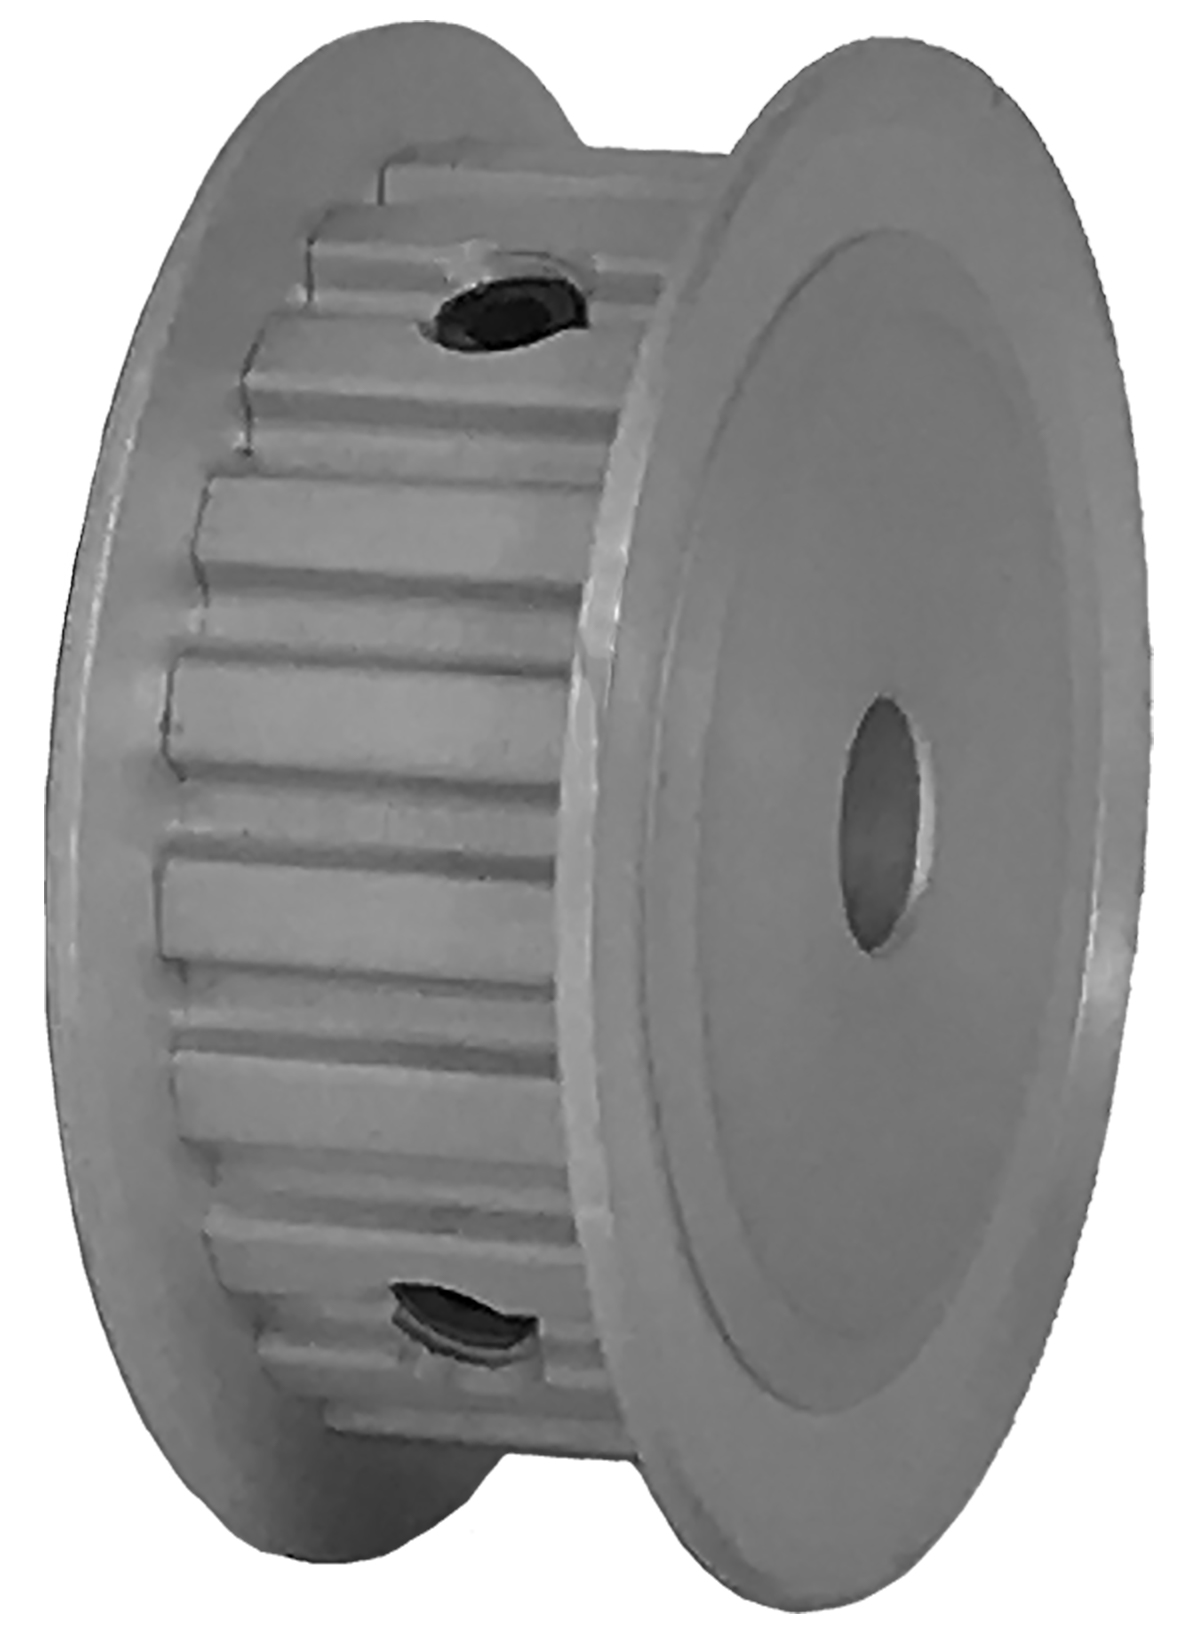 21XL037-3FA3 - Aluminum Imperial Pitch Pulleys